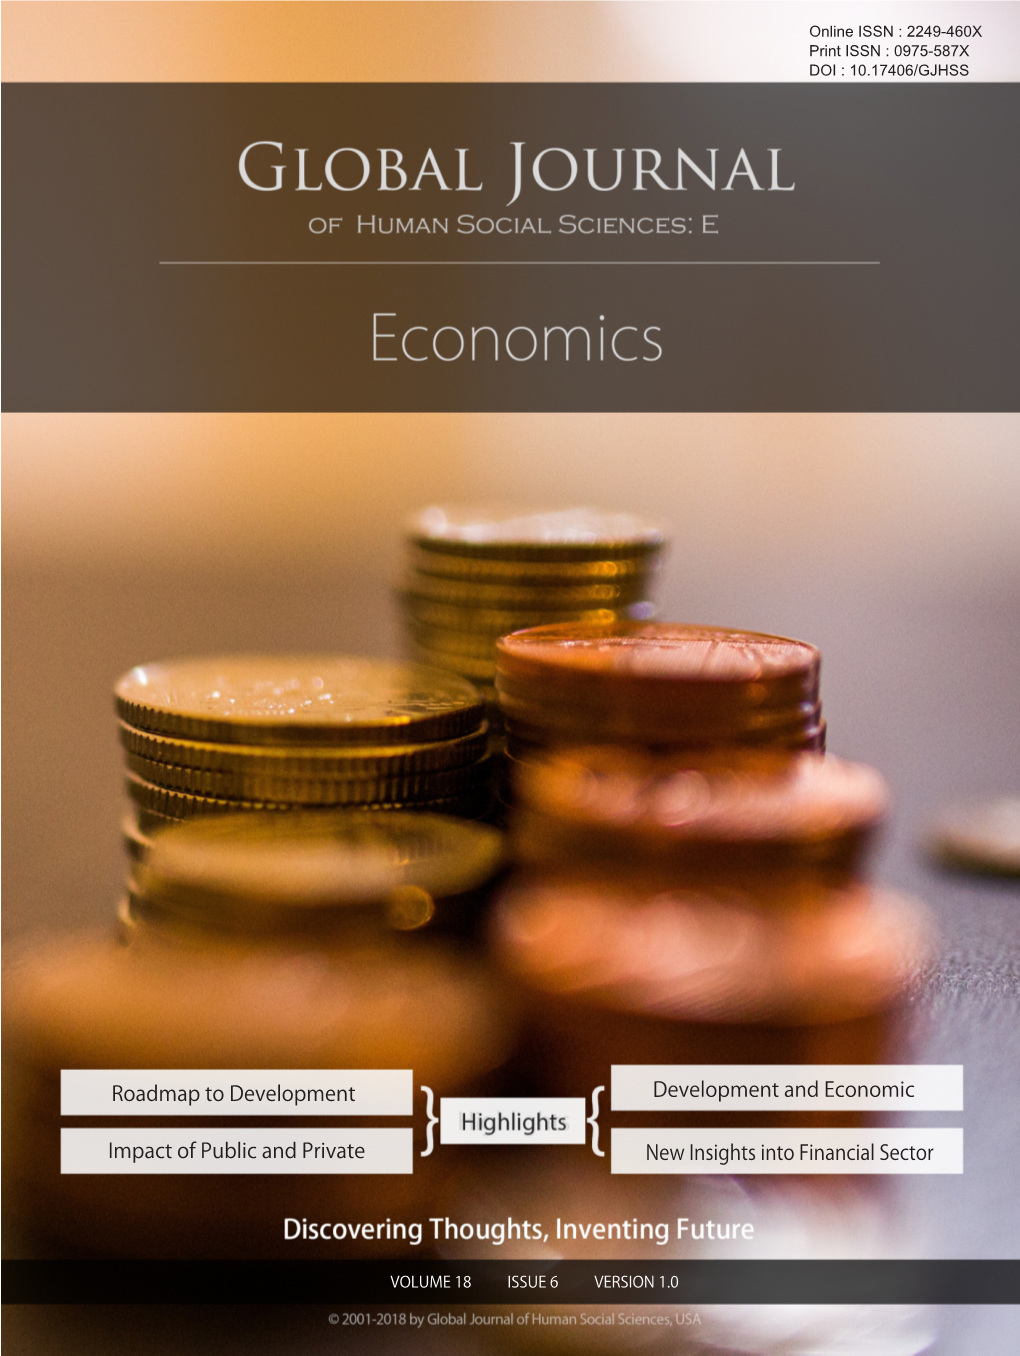 Global Journal of Human Social Science Classical with Rival Views Concerning the Impact of Public Investments in Their Variance of Volumes and Qualities